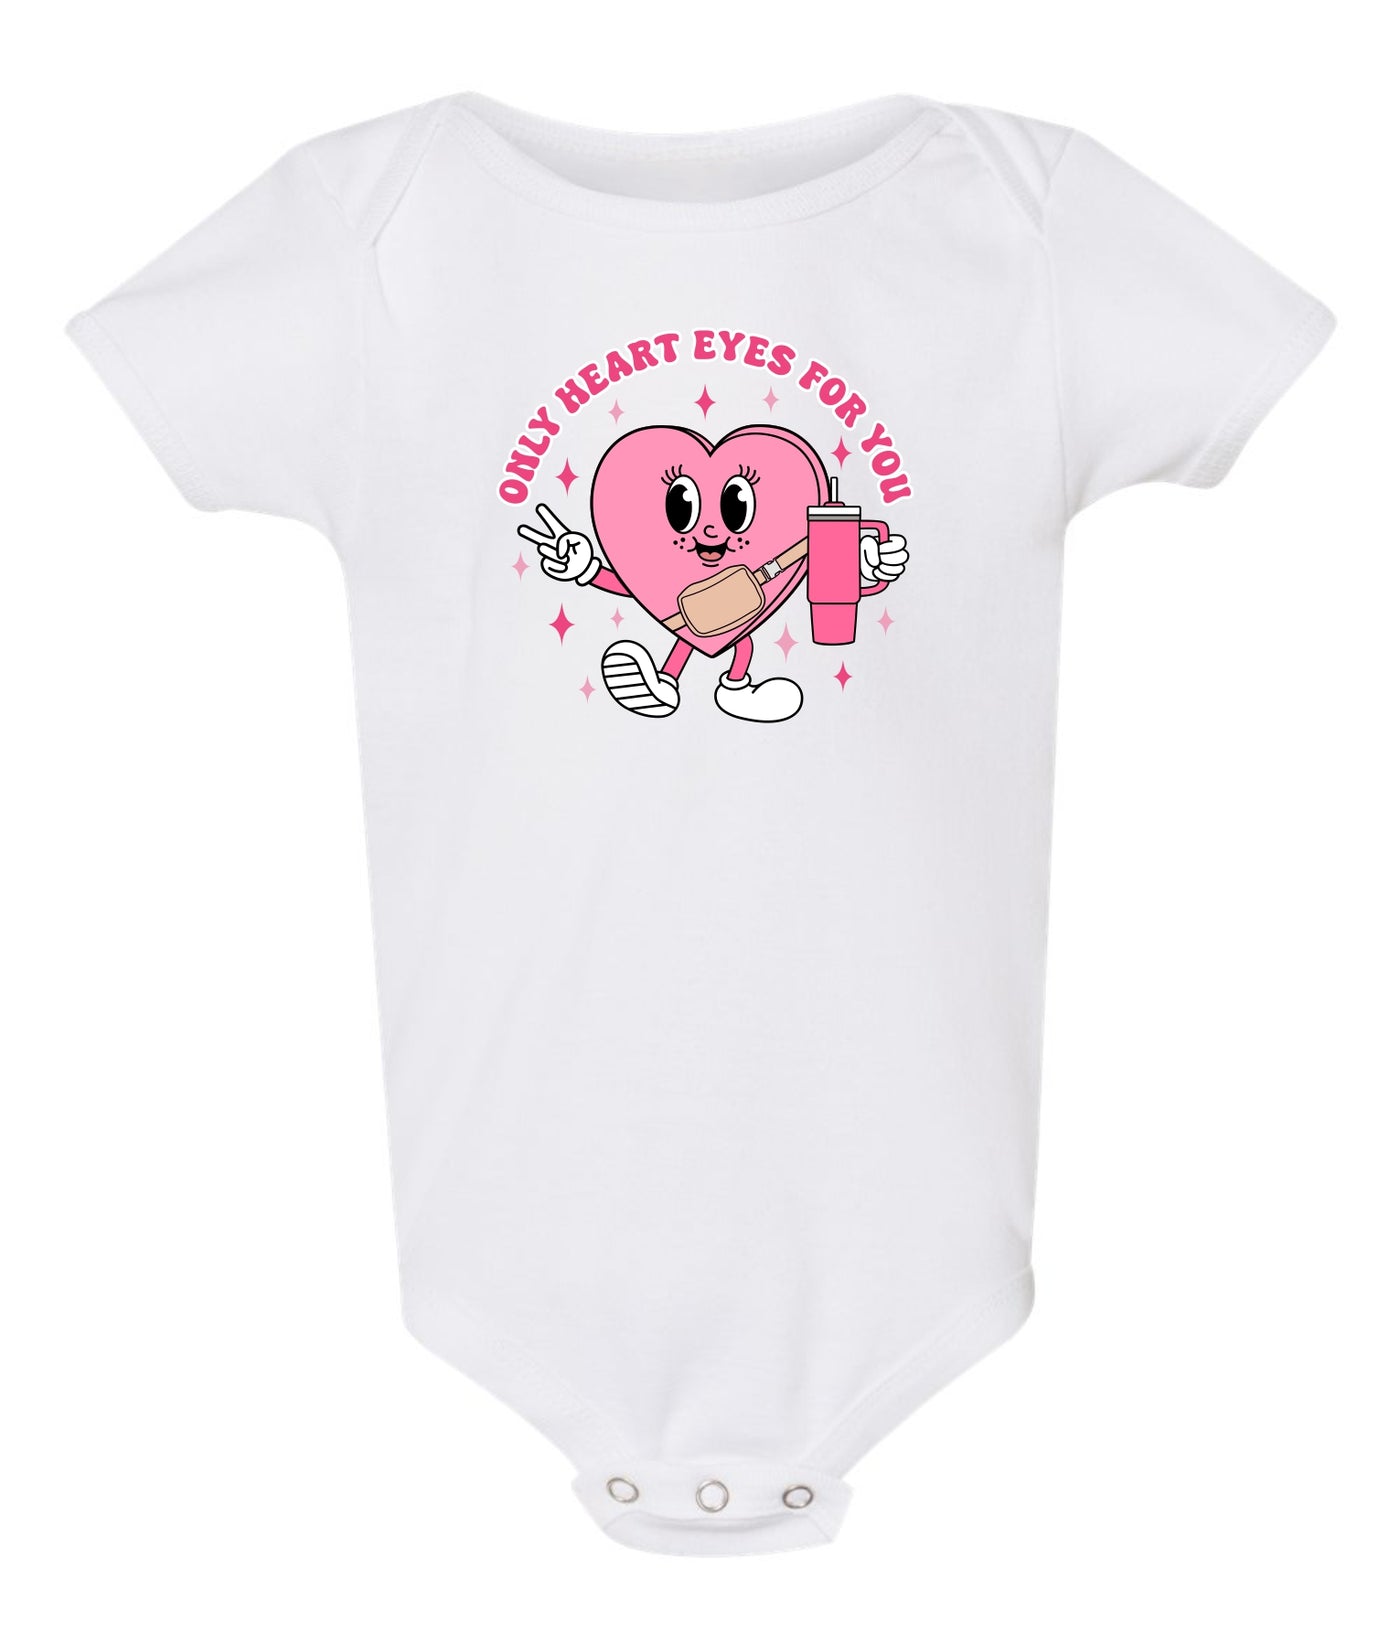 "Heart Eyes Only For You" Onesie